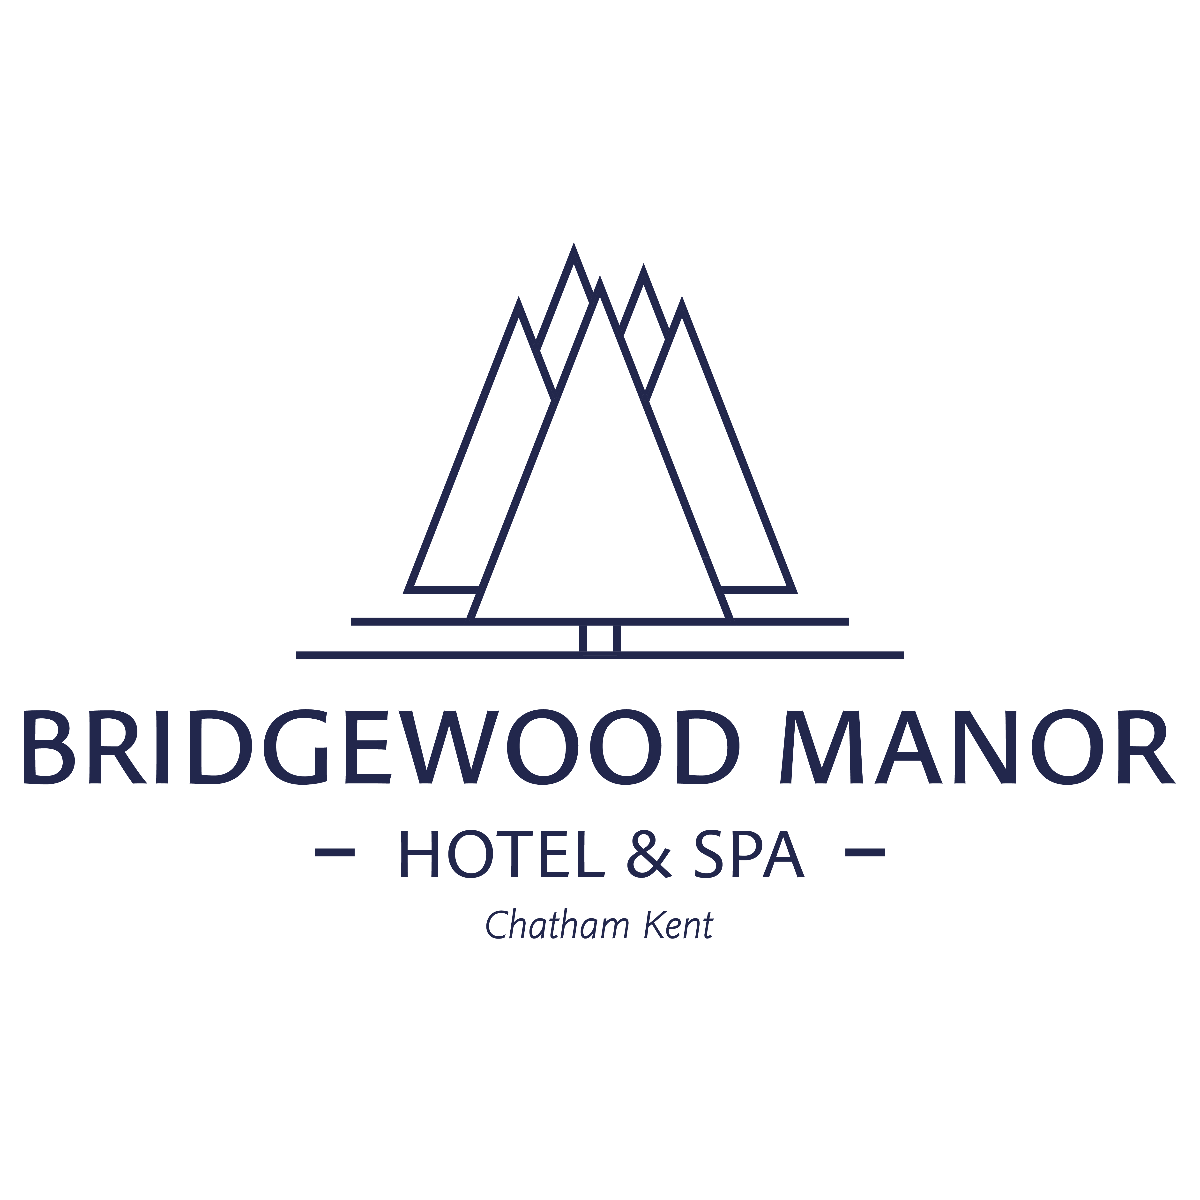 Gallery Item 7 for Bridgewood Manor Hotel and Spa